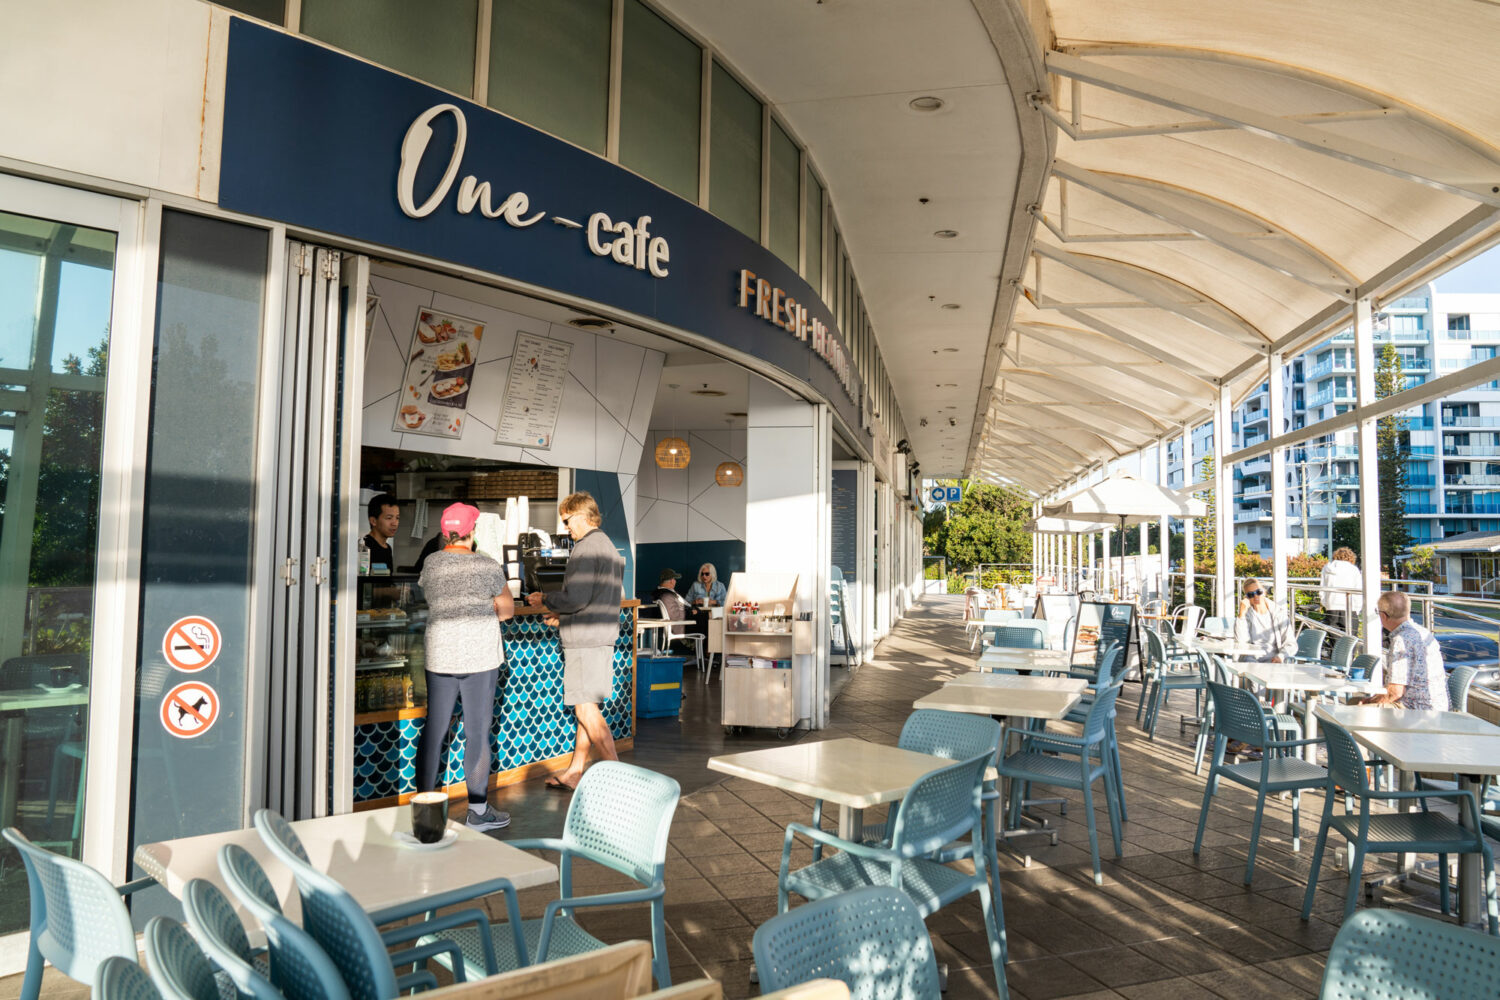 One Cafe at the Labrador PARK SHORE lifestyle village. It has a blue sign above the entrance with white writing. There are people placing an order for coffee at the counter.